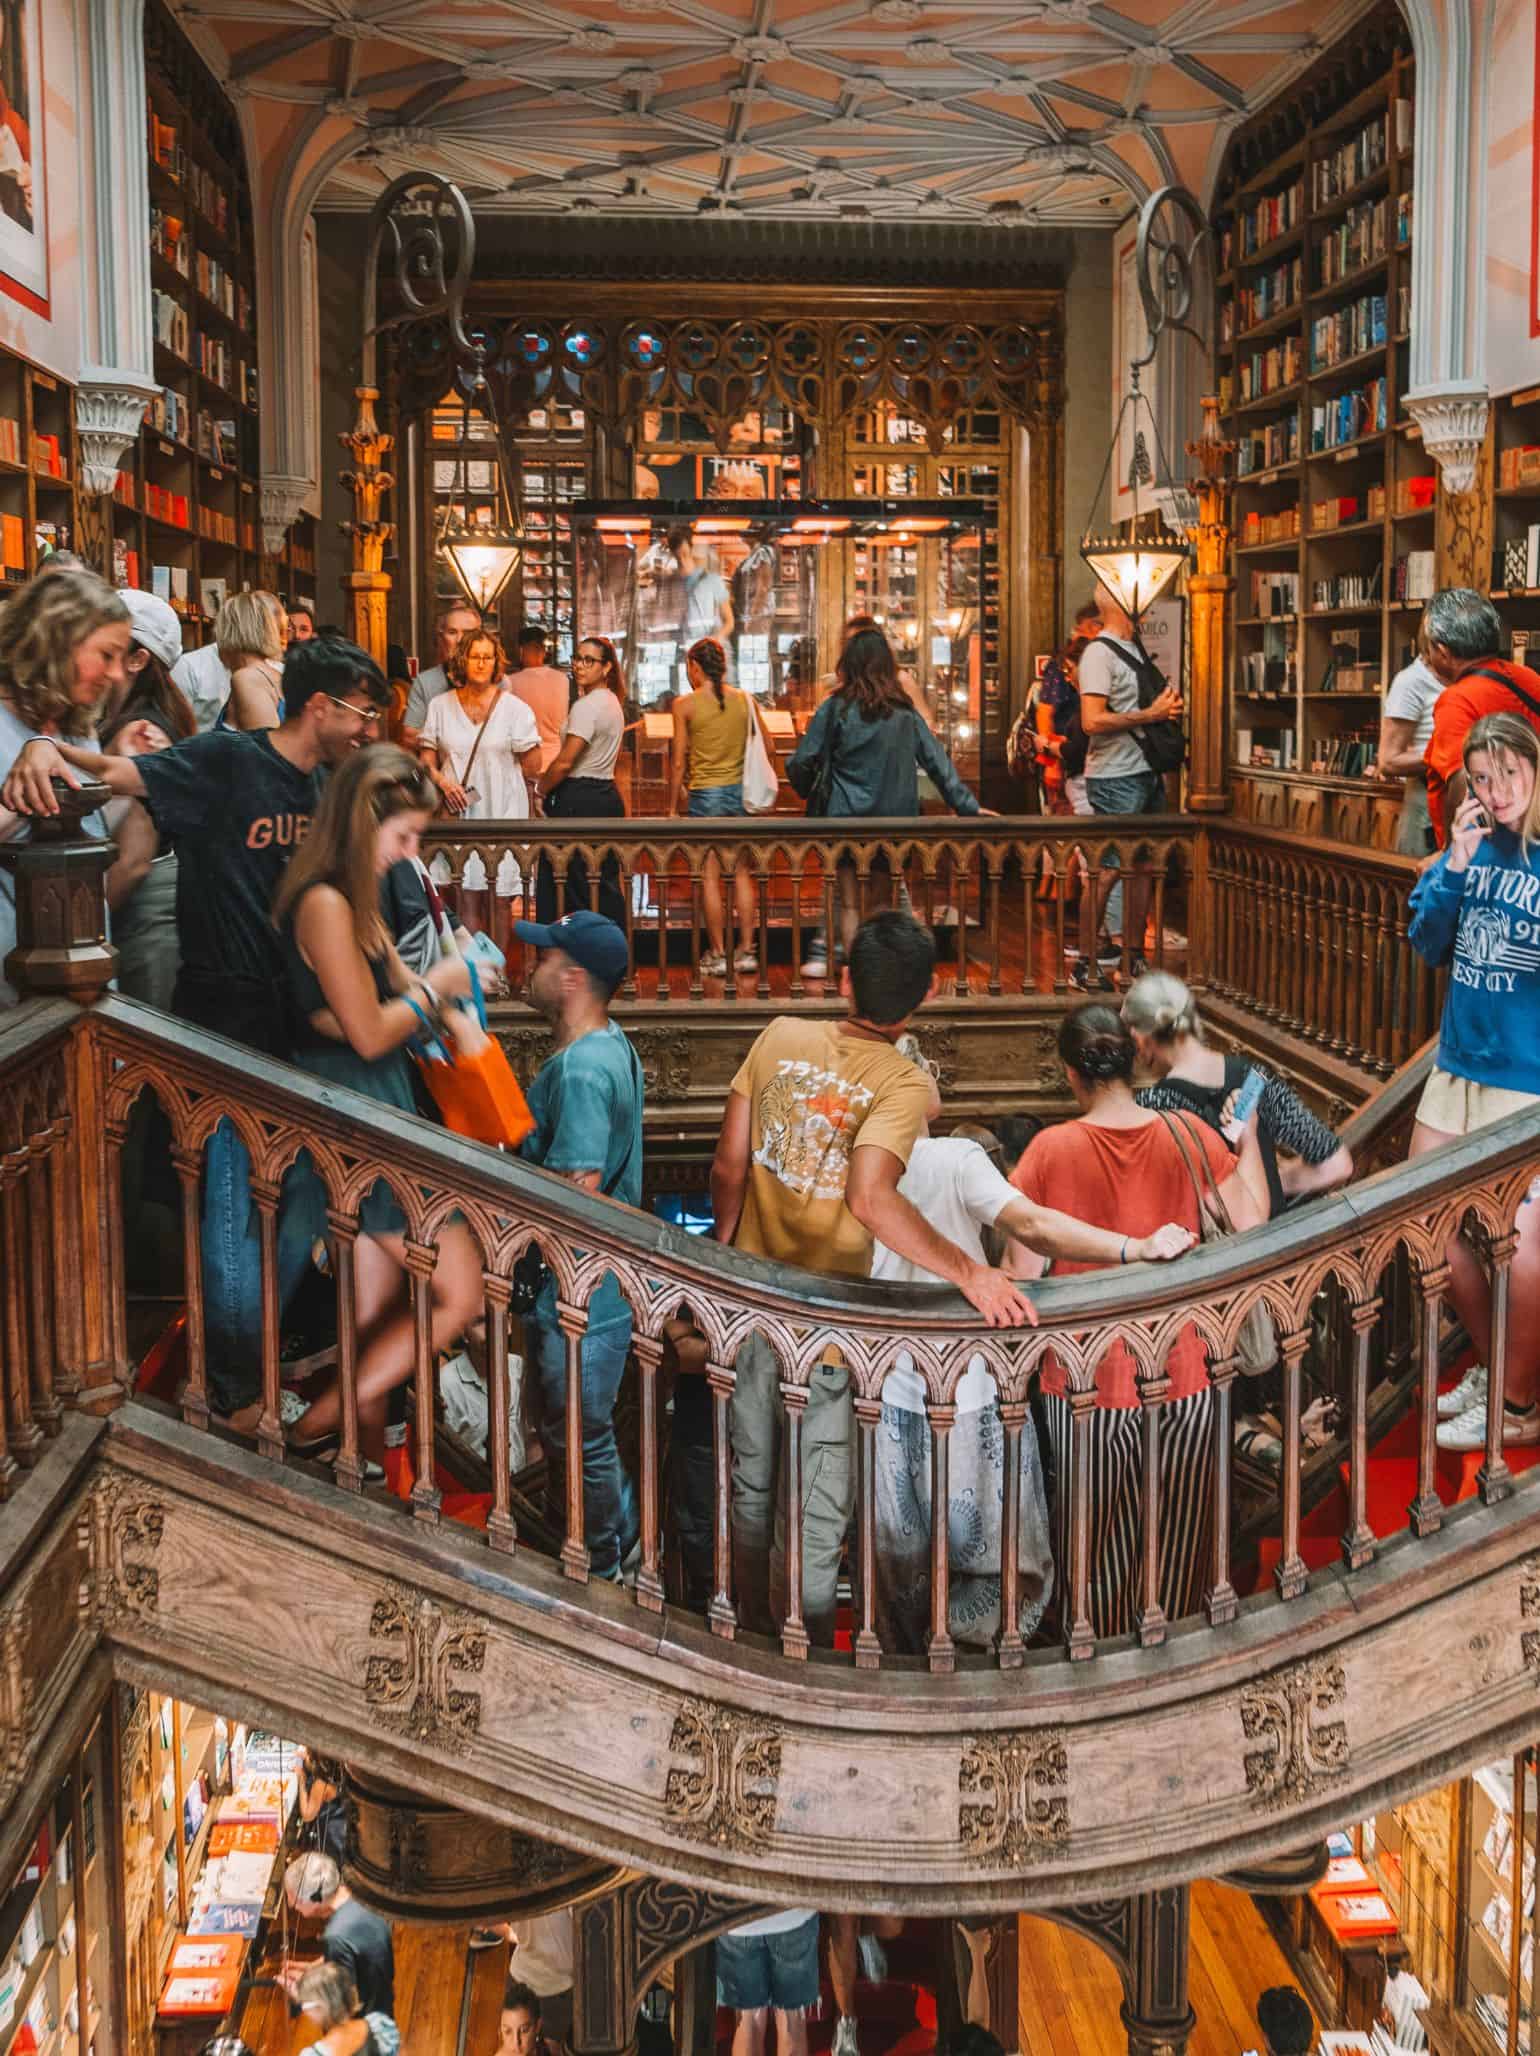 Way too many tourists crowding the interior of the Livraria Lello bookstore. 